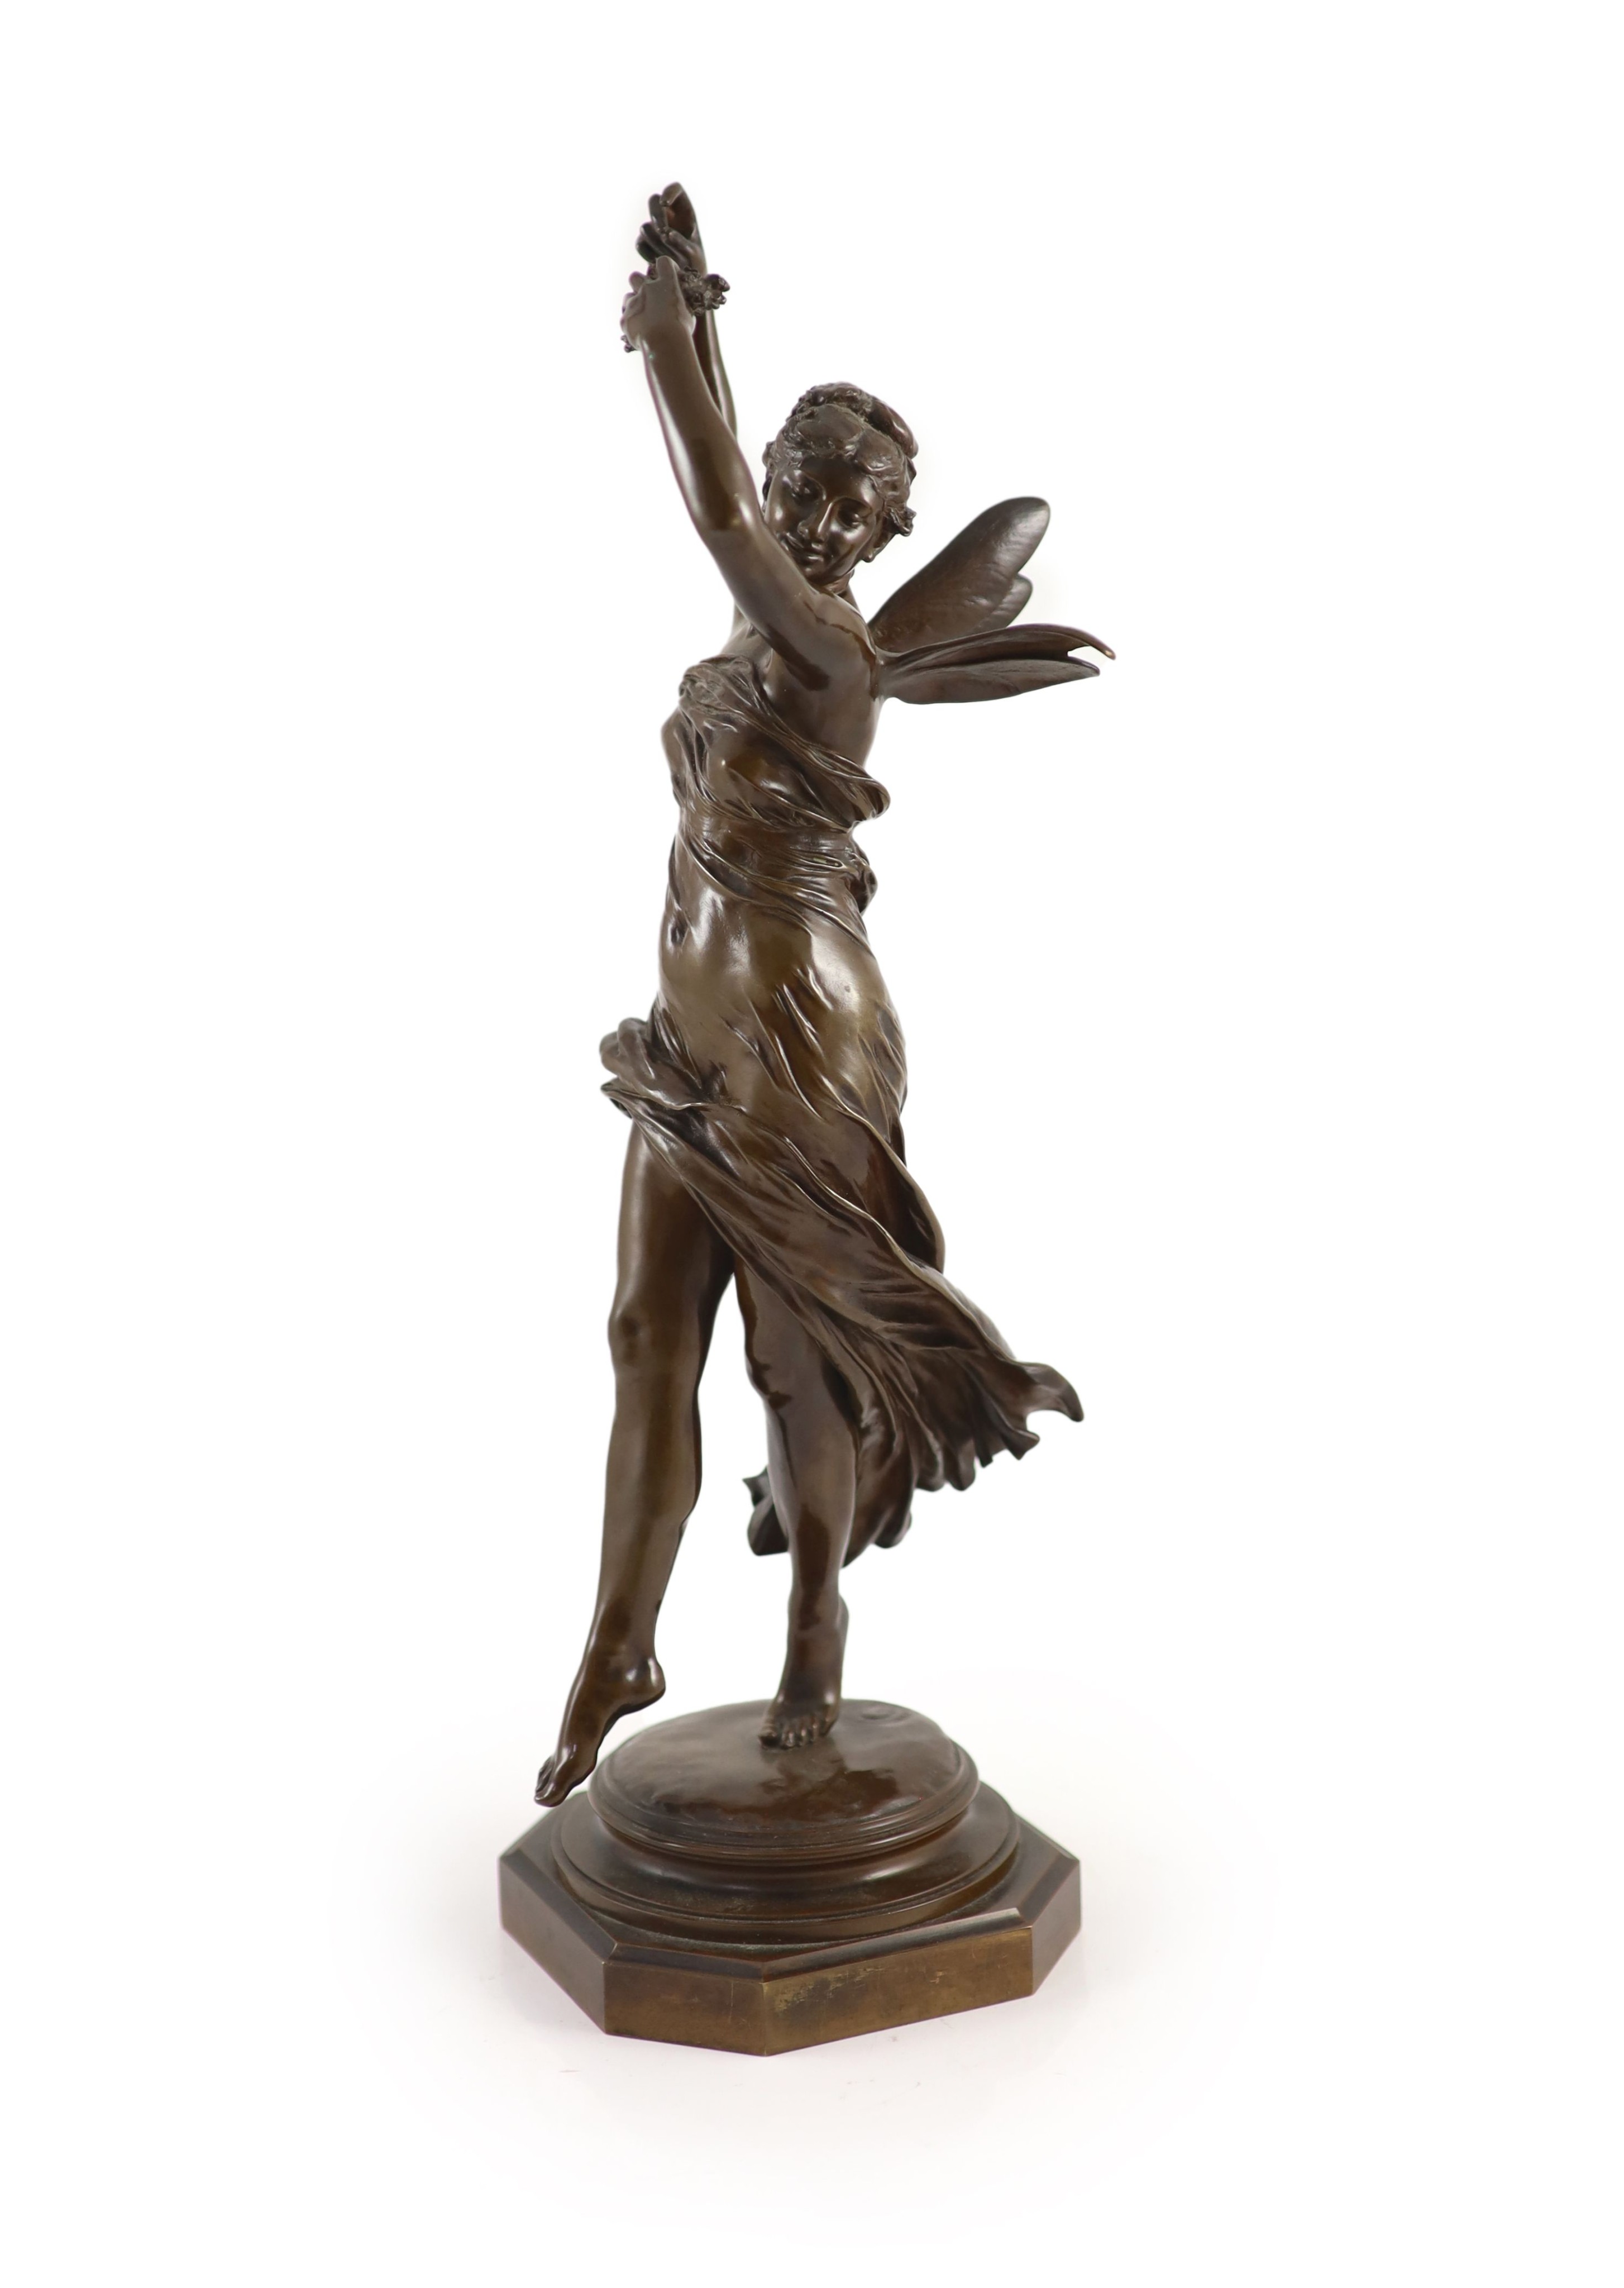 Eugene Delaplanche (French, 1836-1891), a bronze figure of the nymph 'Zephyr' H 40cm. W 12cm.